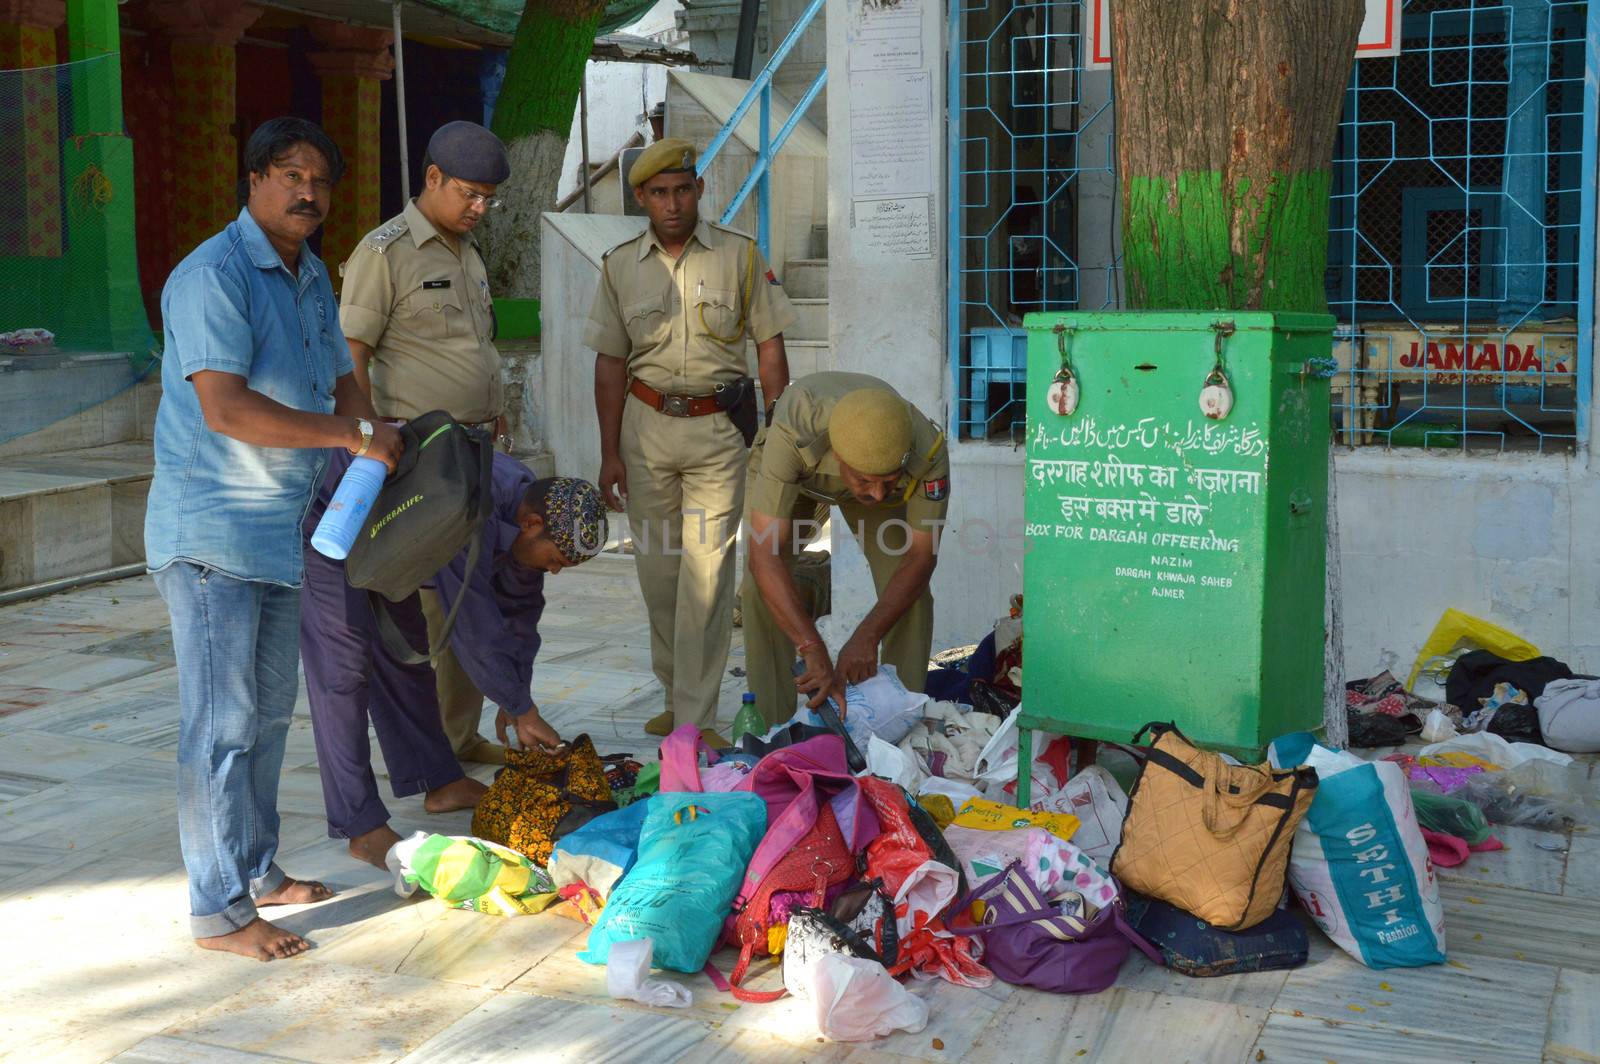 INDIA, Ajmer: Police search bags after a hoax bomb scare evacuated thousands of pilgrims from the Sufi shrine of Ajmer Sharif Dargah in Rajasthan on September 21, 2015.The call prompted security officials and bomb disposal crew to conduct a thorough search of the shrine, which lasted for more than an hour. After finding no suspected packages at the shrine, the call was determined to be a hoax. 